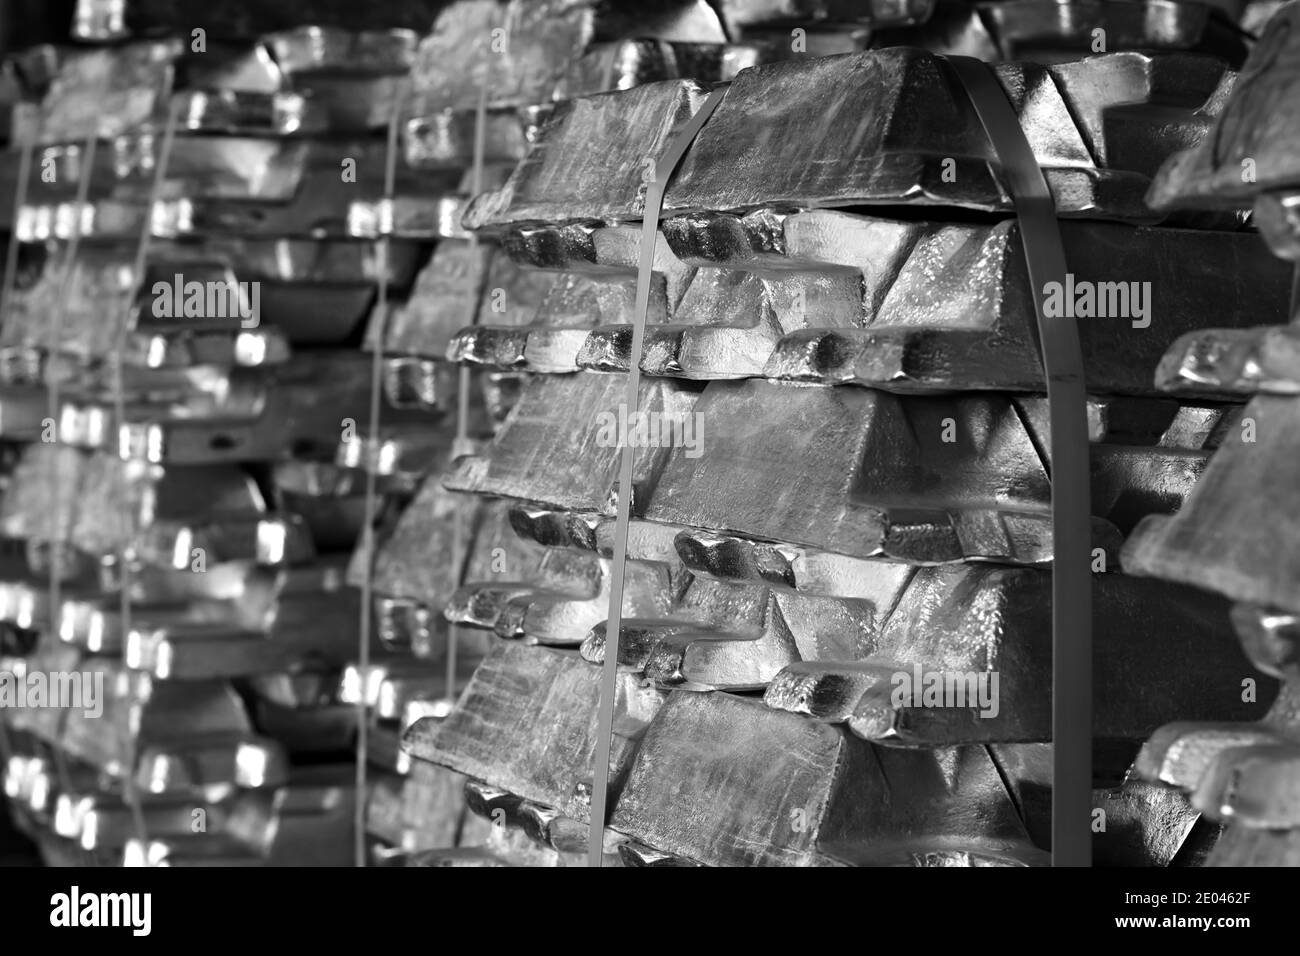 industry background picture of aluminum ingots stacked and stored, black and white photography Stock Photo